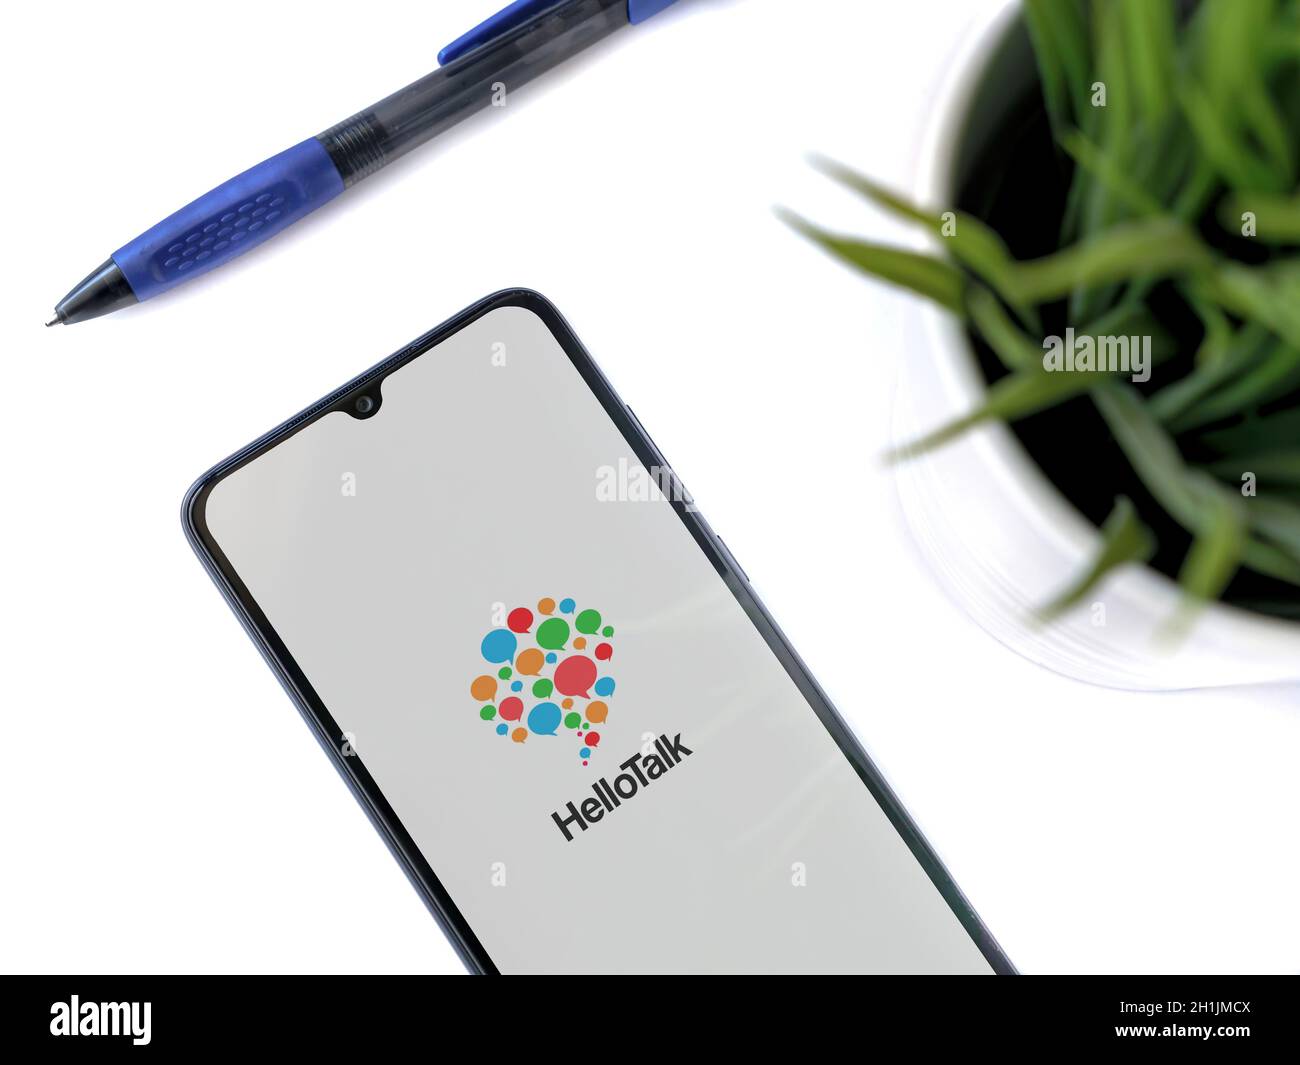 Lod, Israel - July 8, 2020: Modern minimalist office workspace with black mobile smartphone with HelloTalk - Language learning app launch screen with Stock Photo